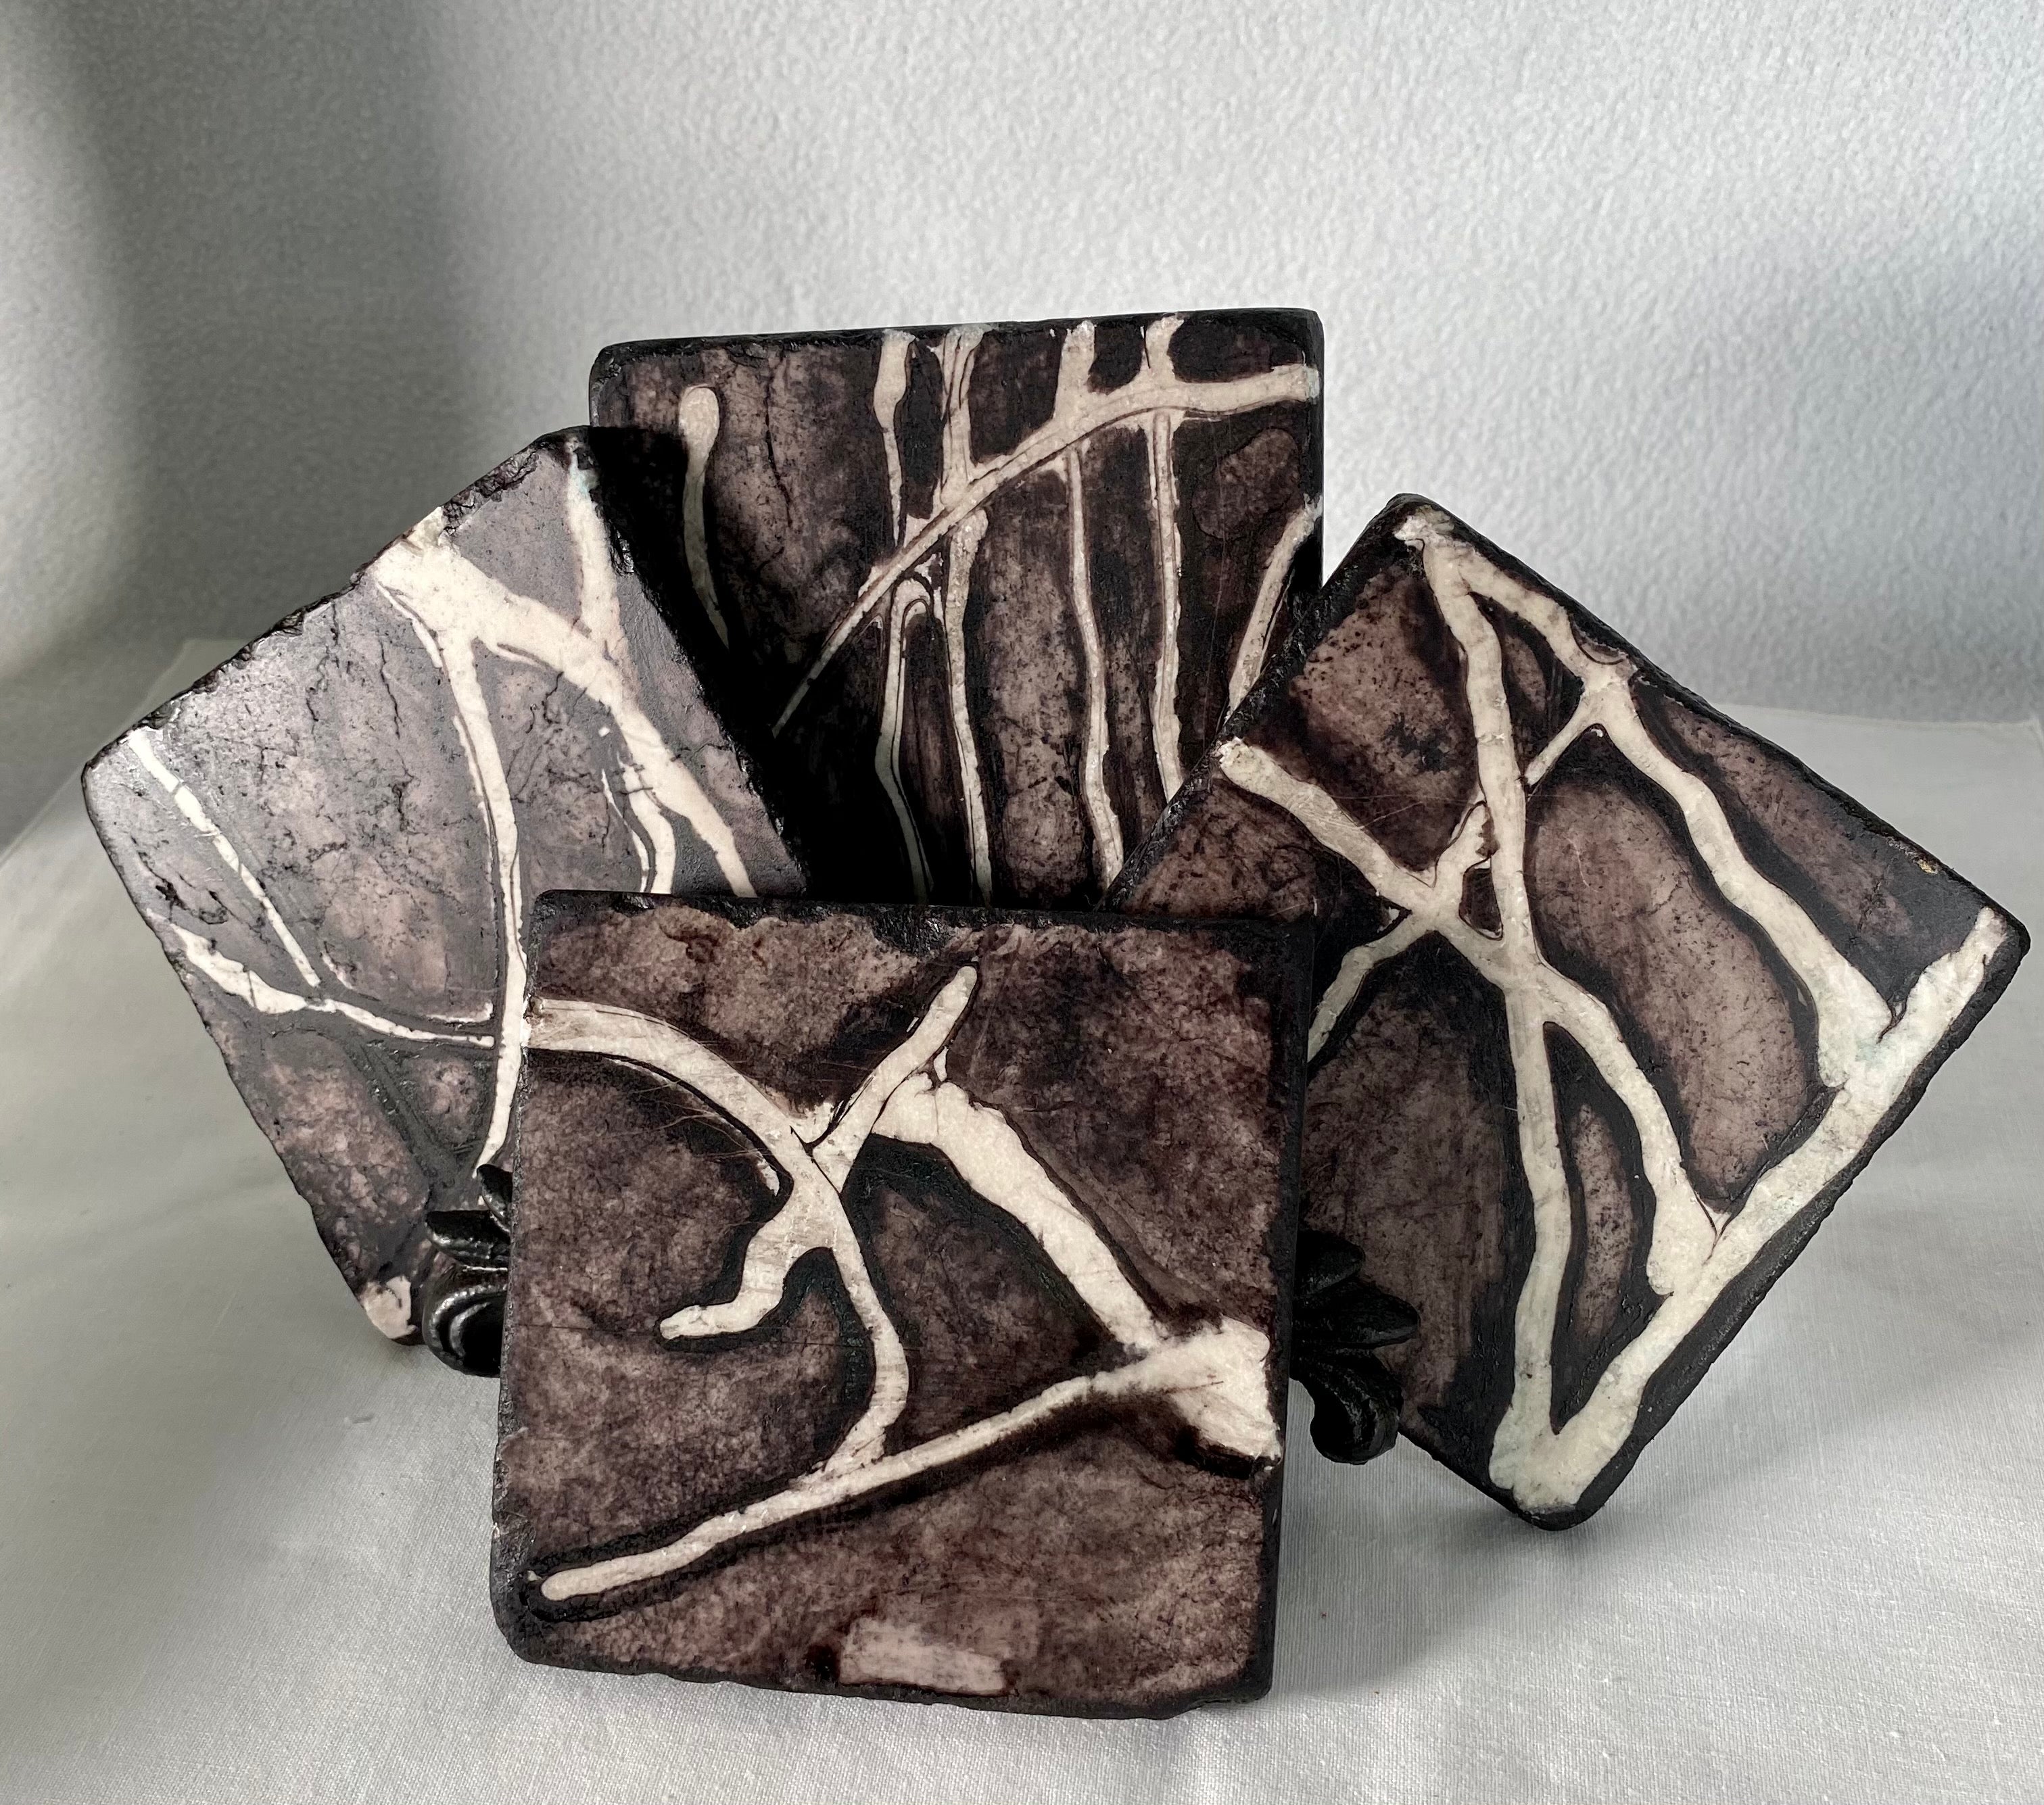 Black And White Drink Coasters product image features a set of four stone coaters.  Hand painted.  Finished to last. Signed.  Cork backed.  Botticino marble tiles. black and white design.  Wipe with damp cloth.  Measures 4" X 4".  Gift wrapped for Father's Day.